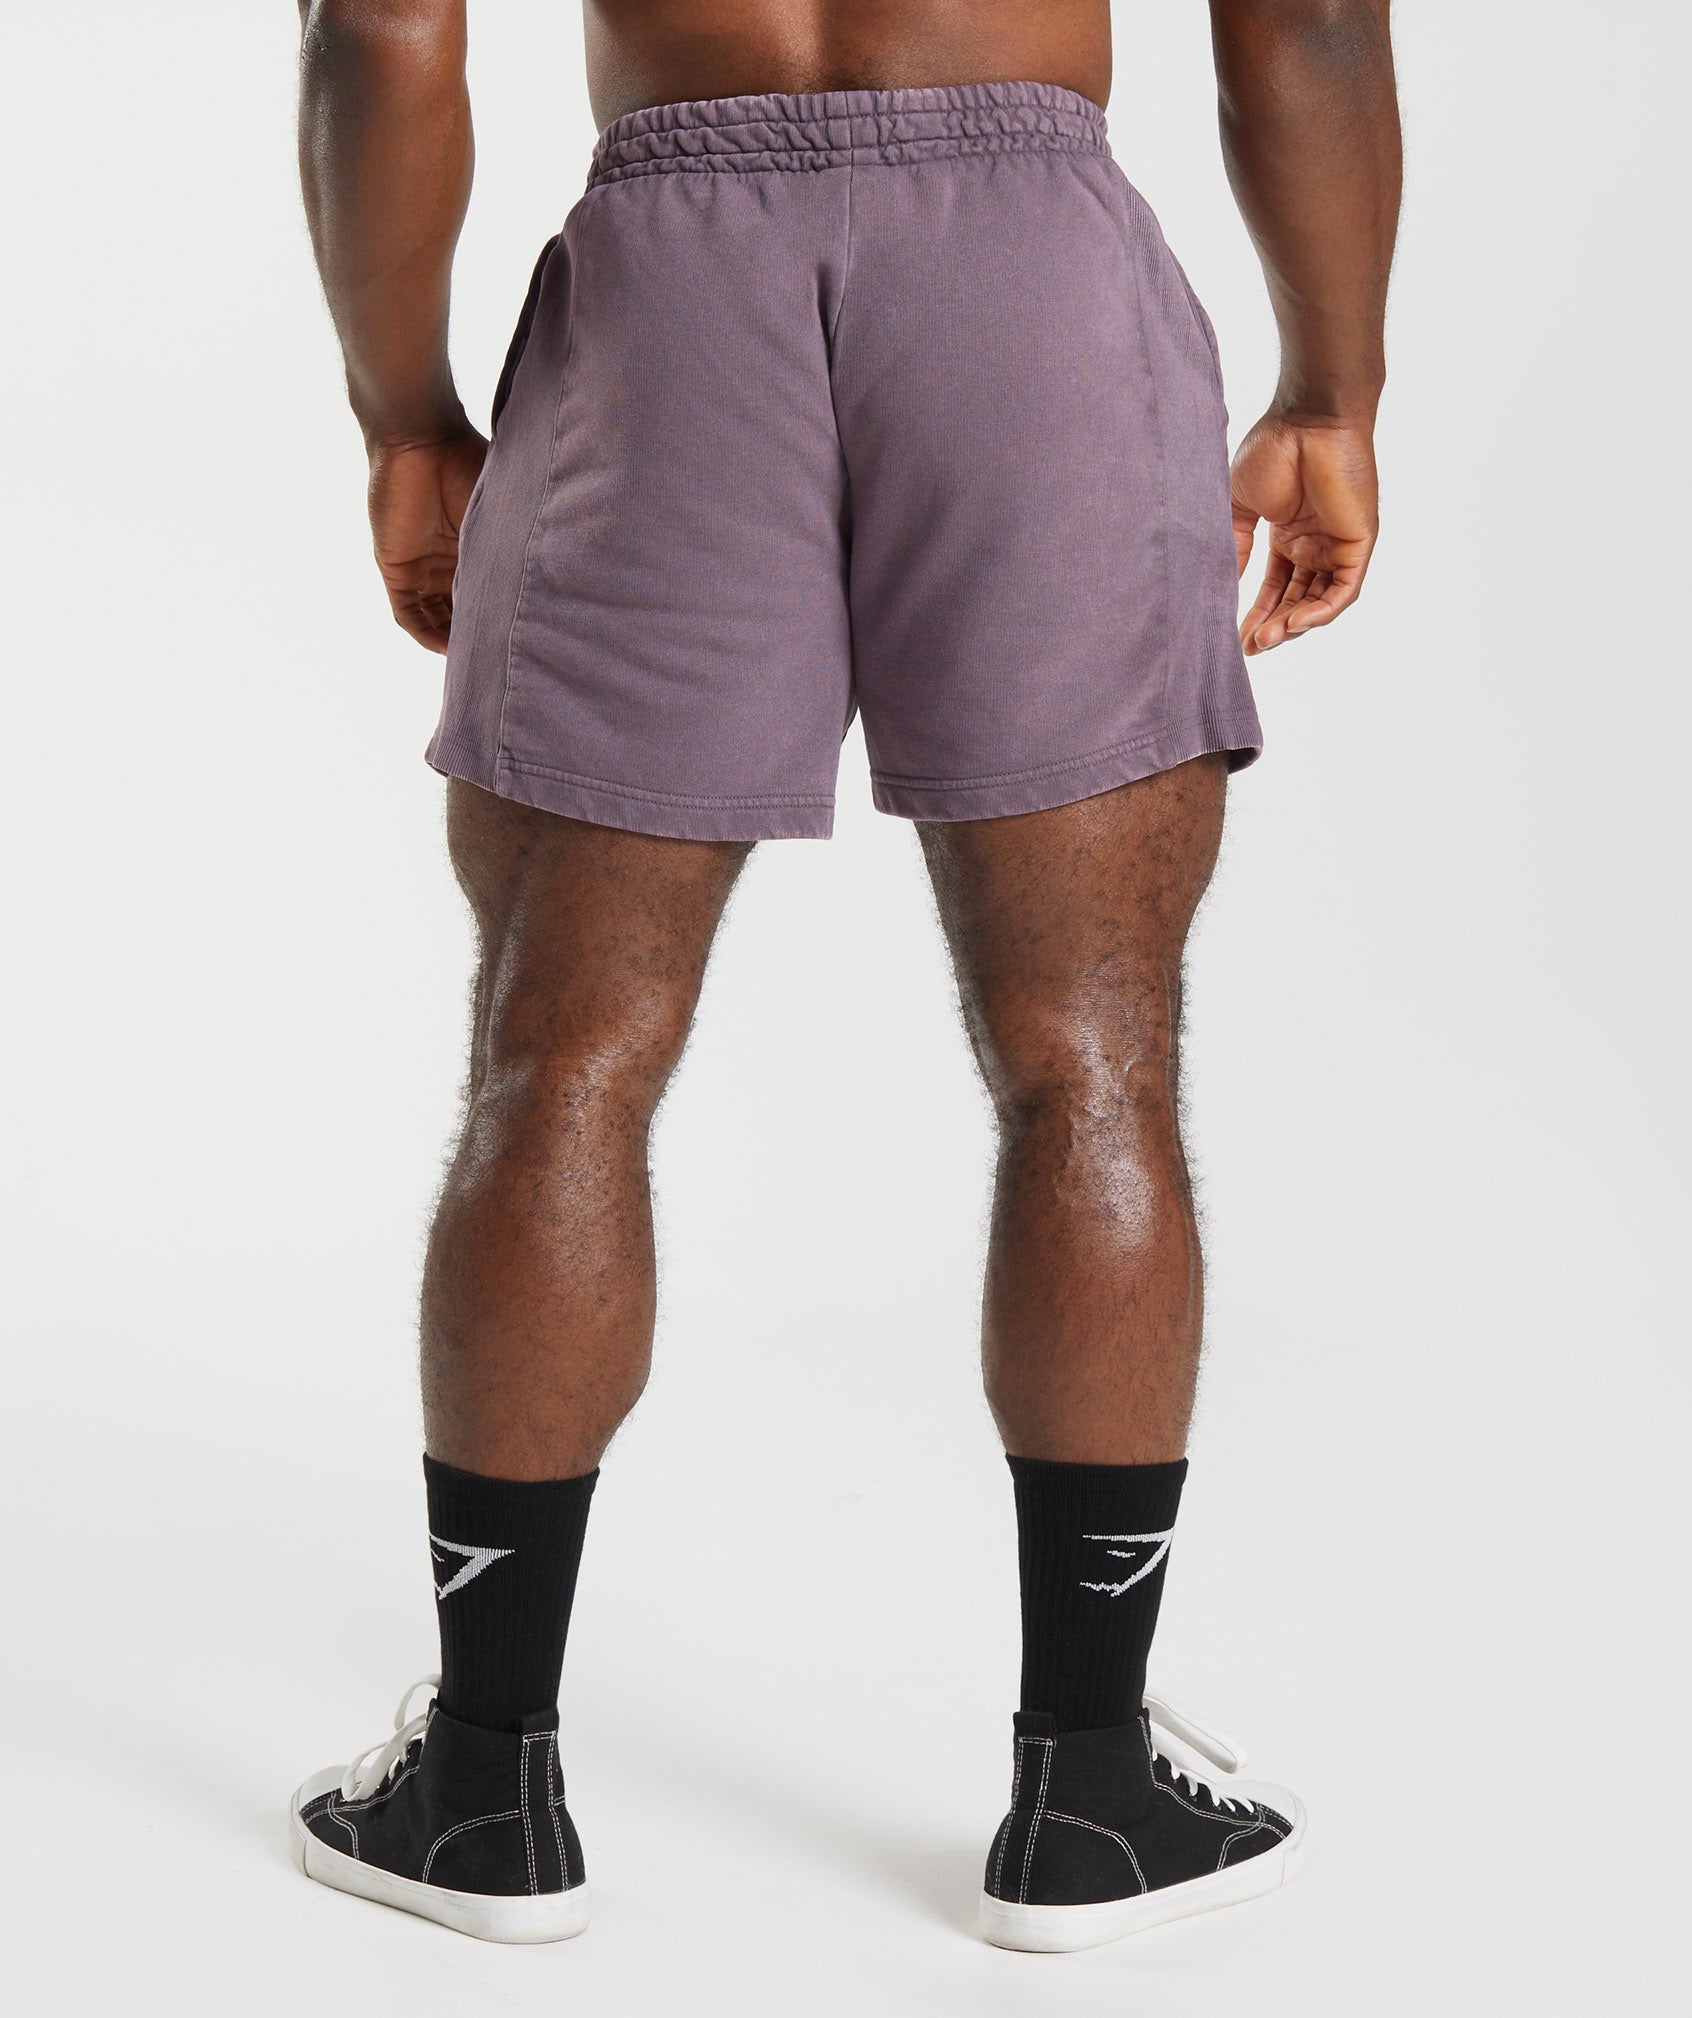 Power Washed 5" Shorts in Musk Lilac - view 2